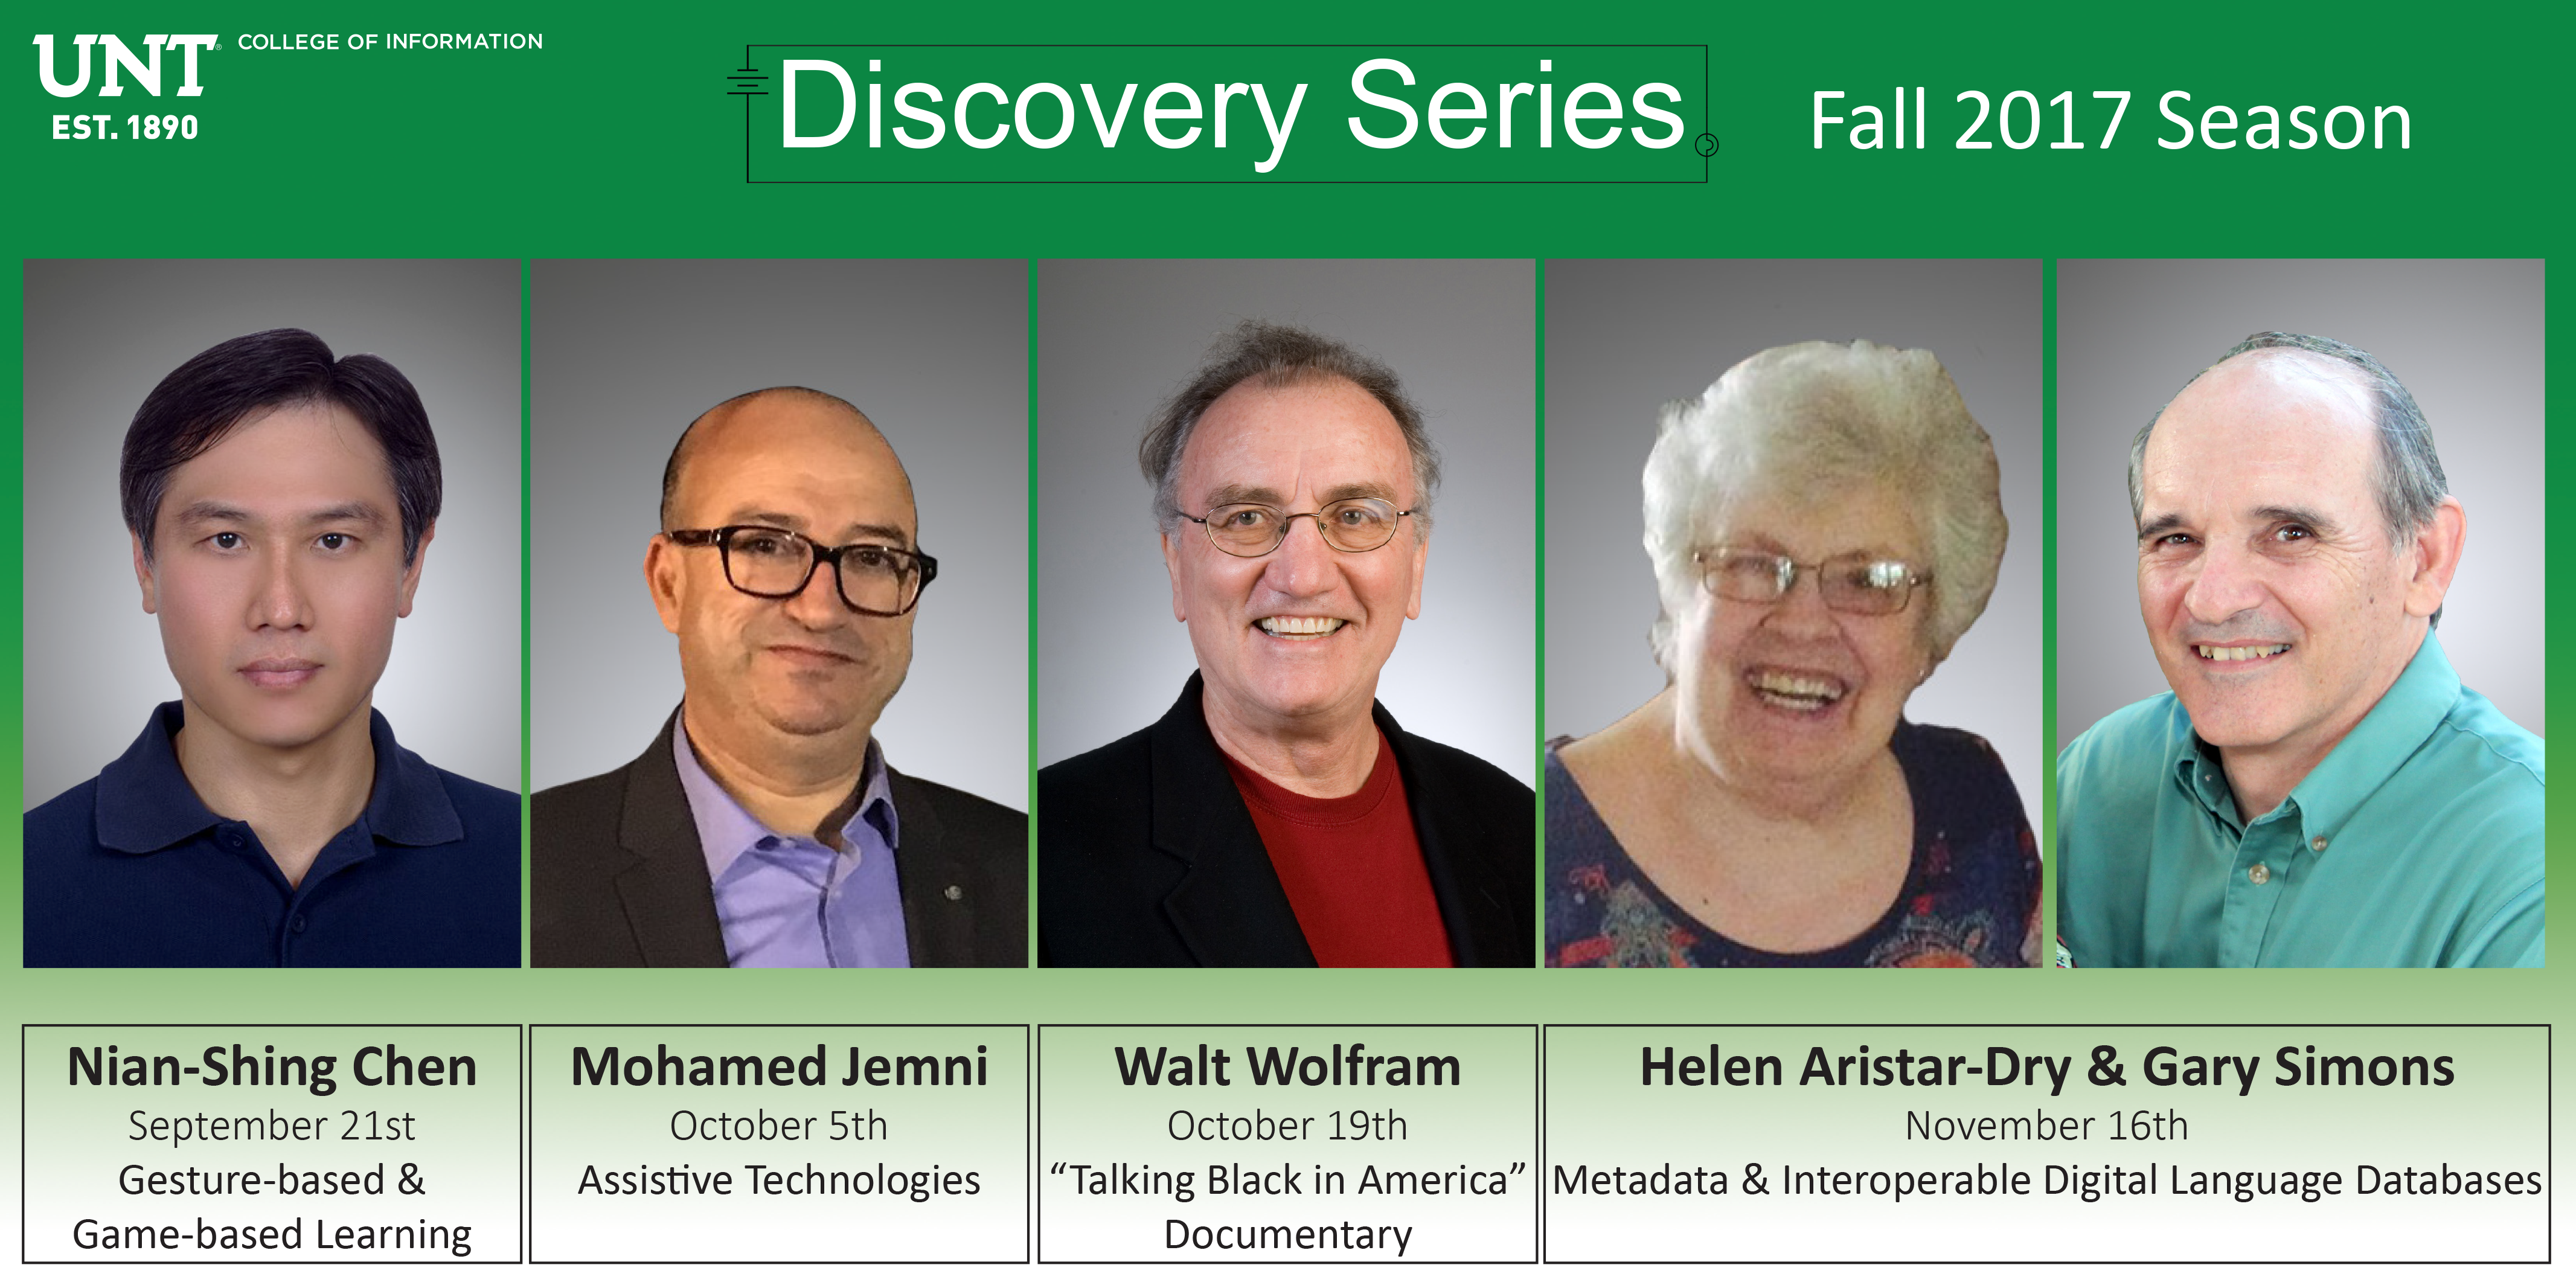 Discovery Series Fall 2017